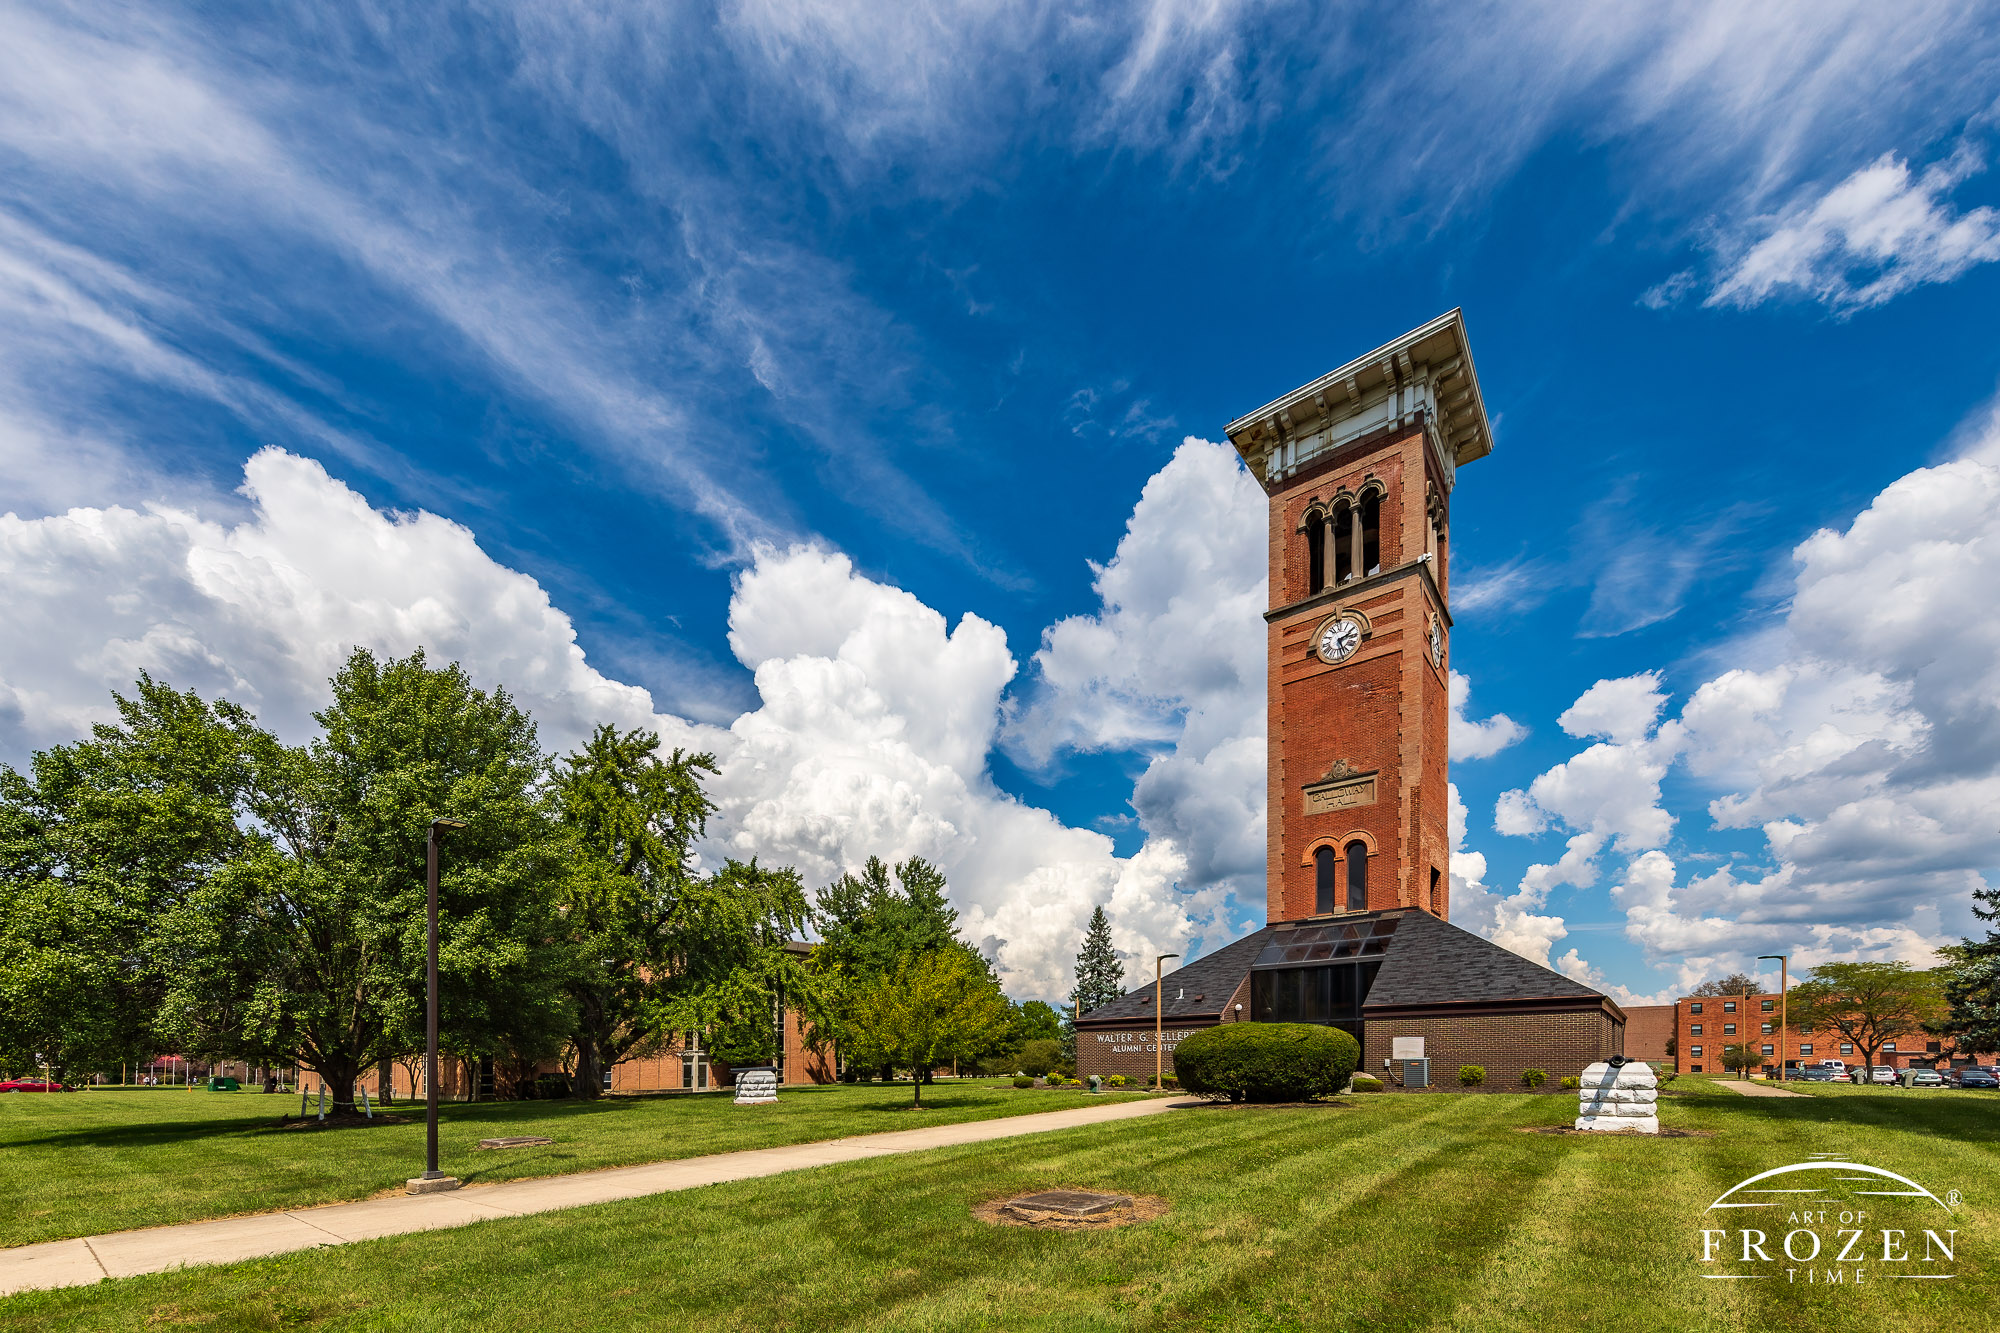 The Central State University Alumni Center towers among the cumulonimbus clouds on a summer day